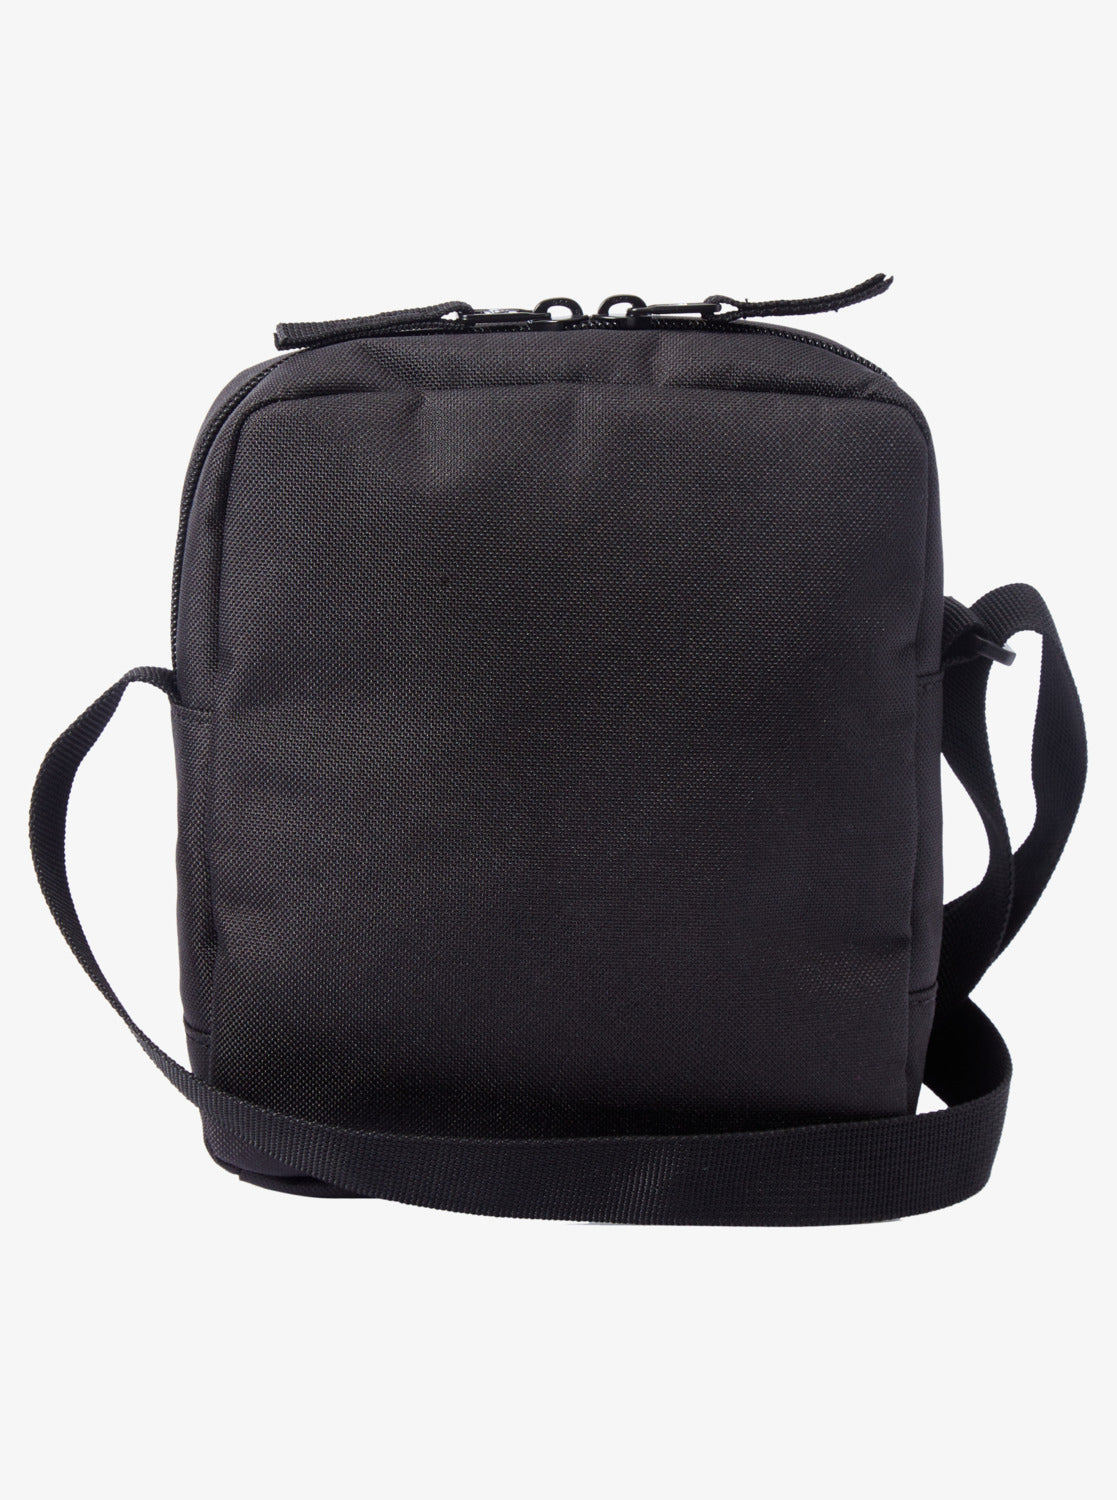 Quiksilver Magicall Small Shoulder Bag in Black